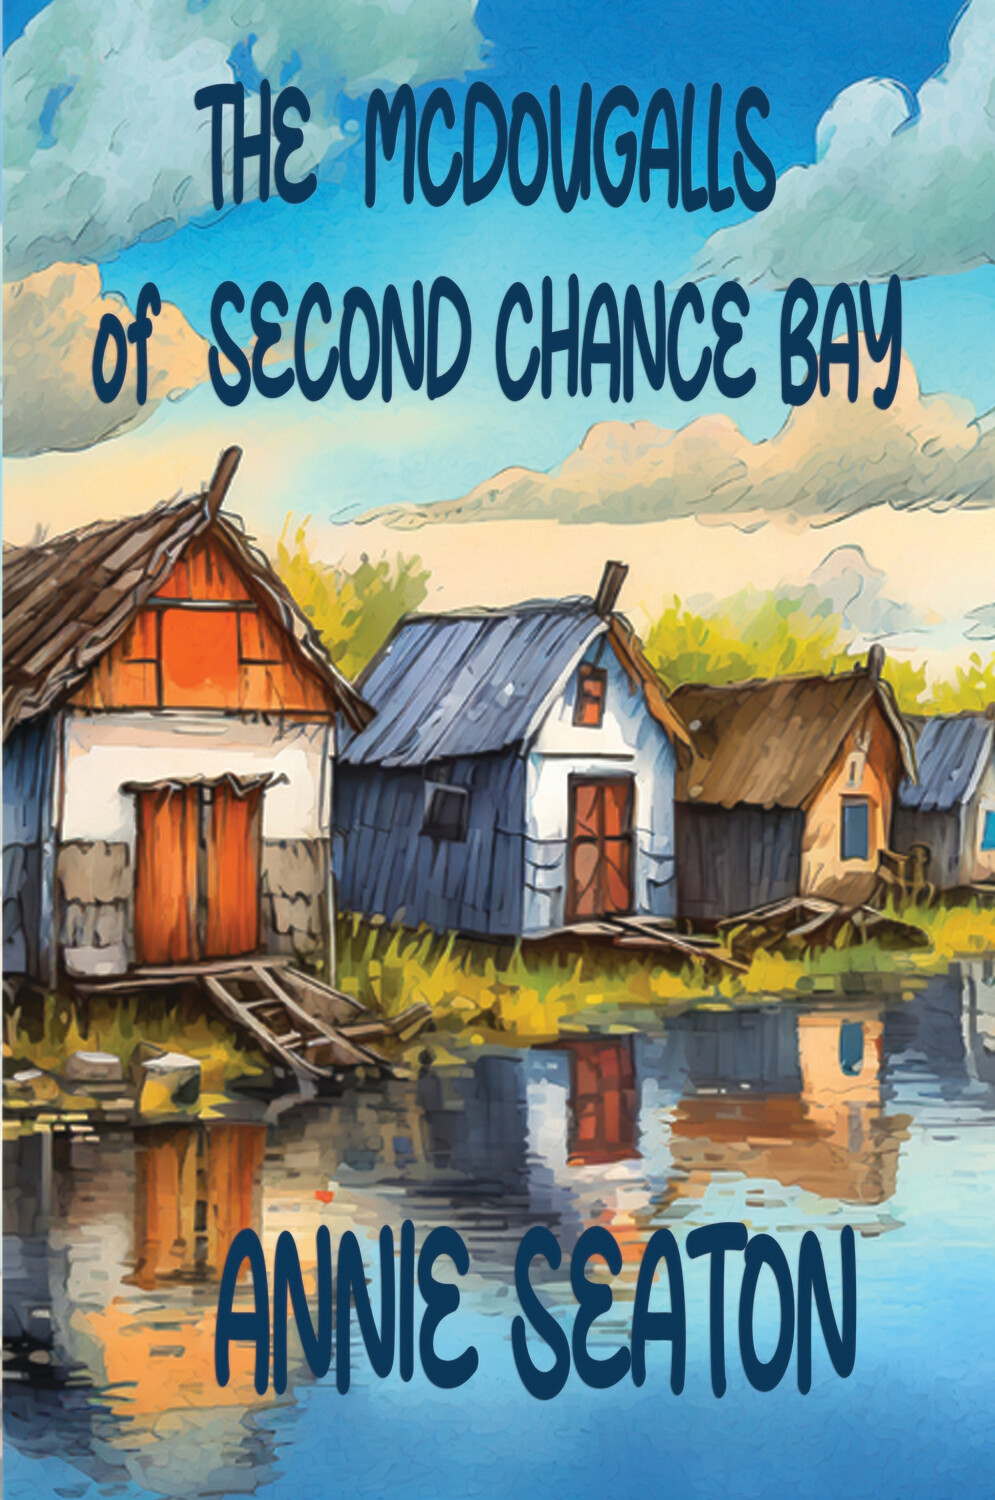 The McDougals of Second Chance Bay (4 books in one)